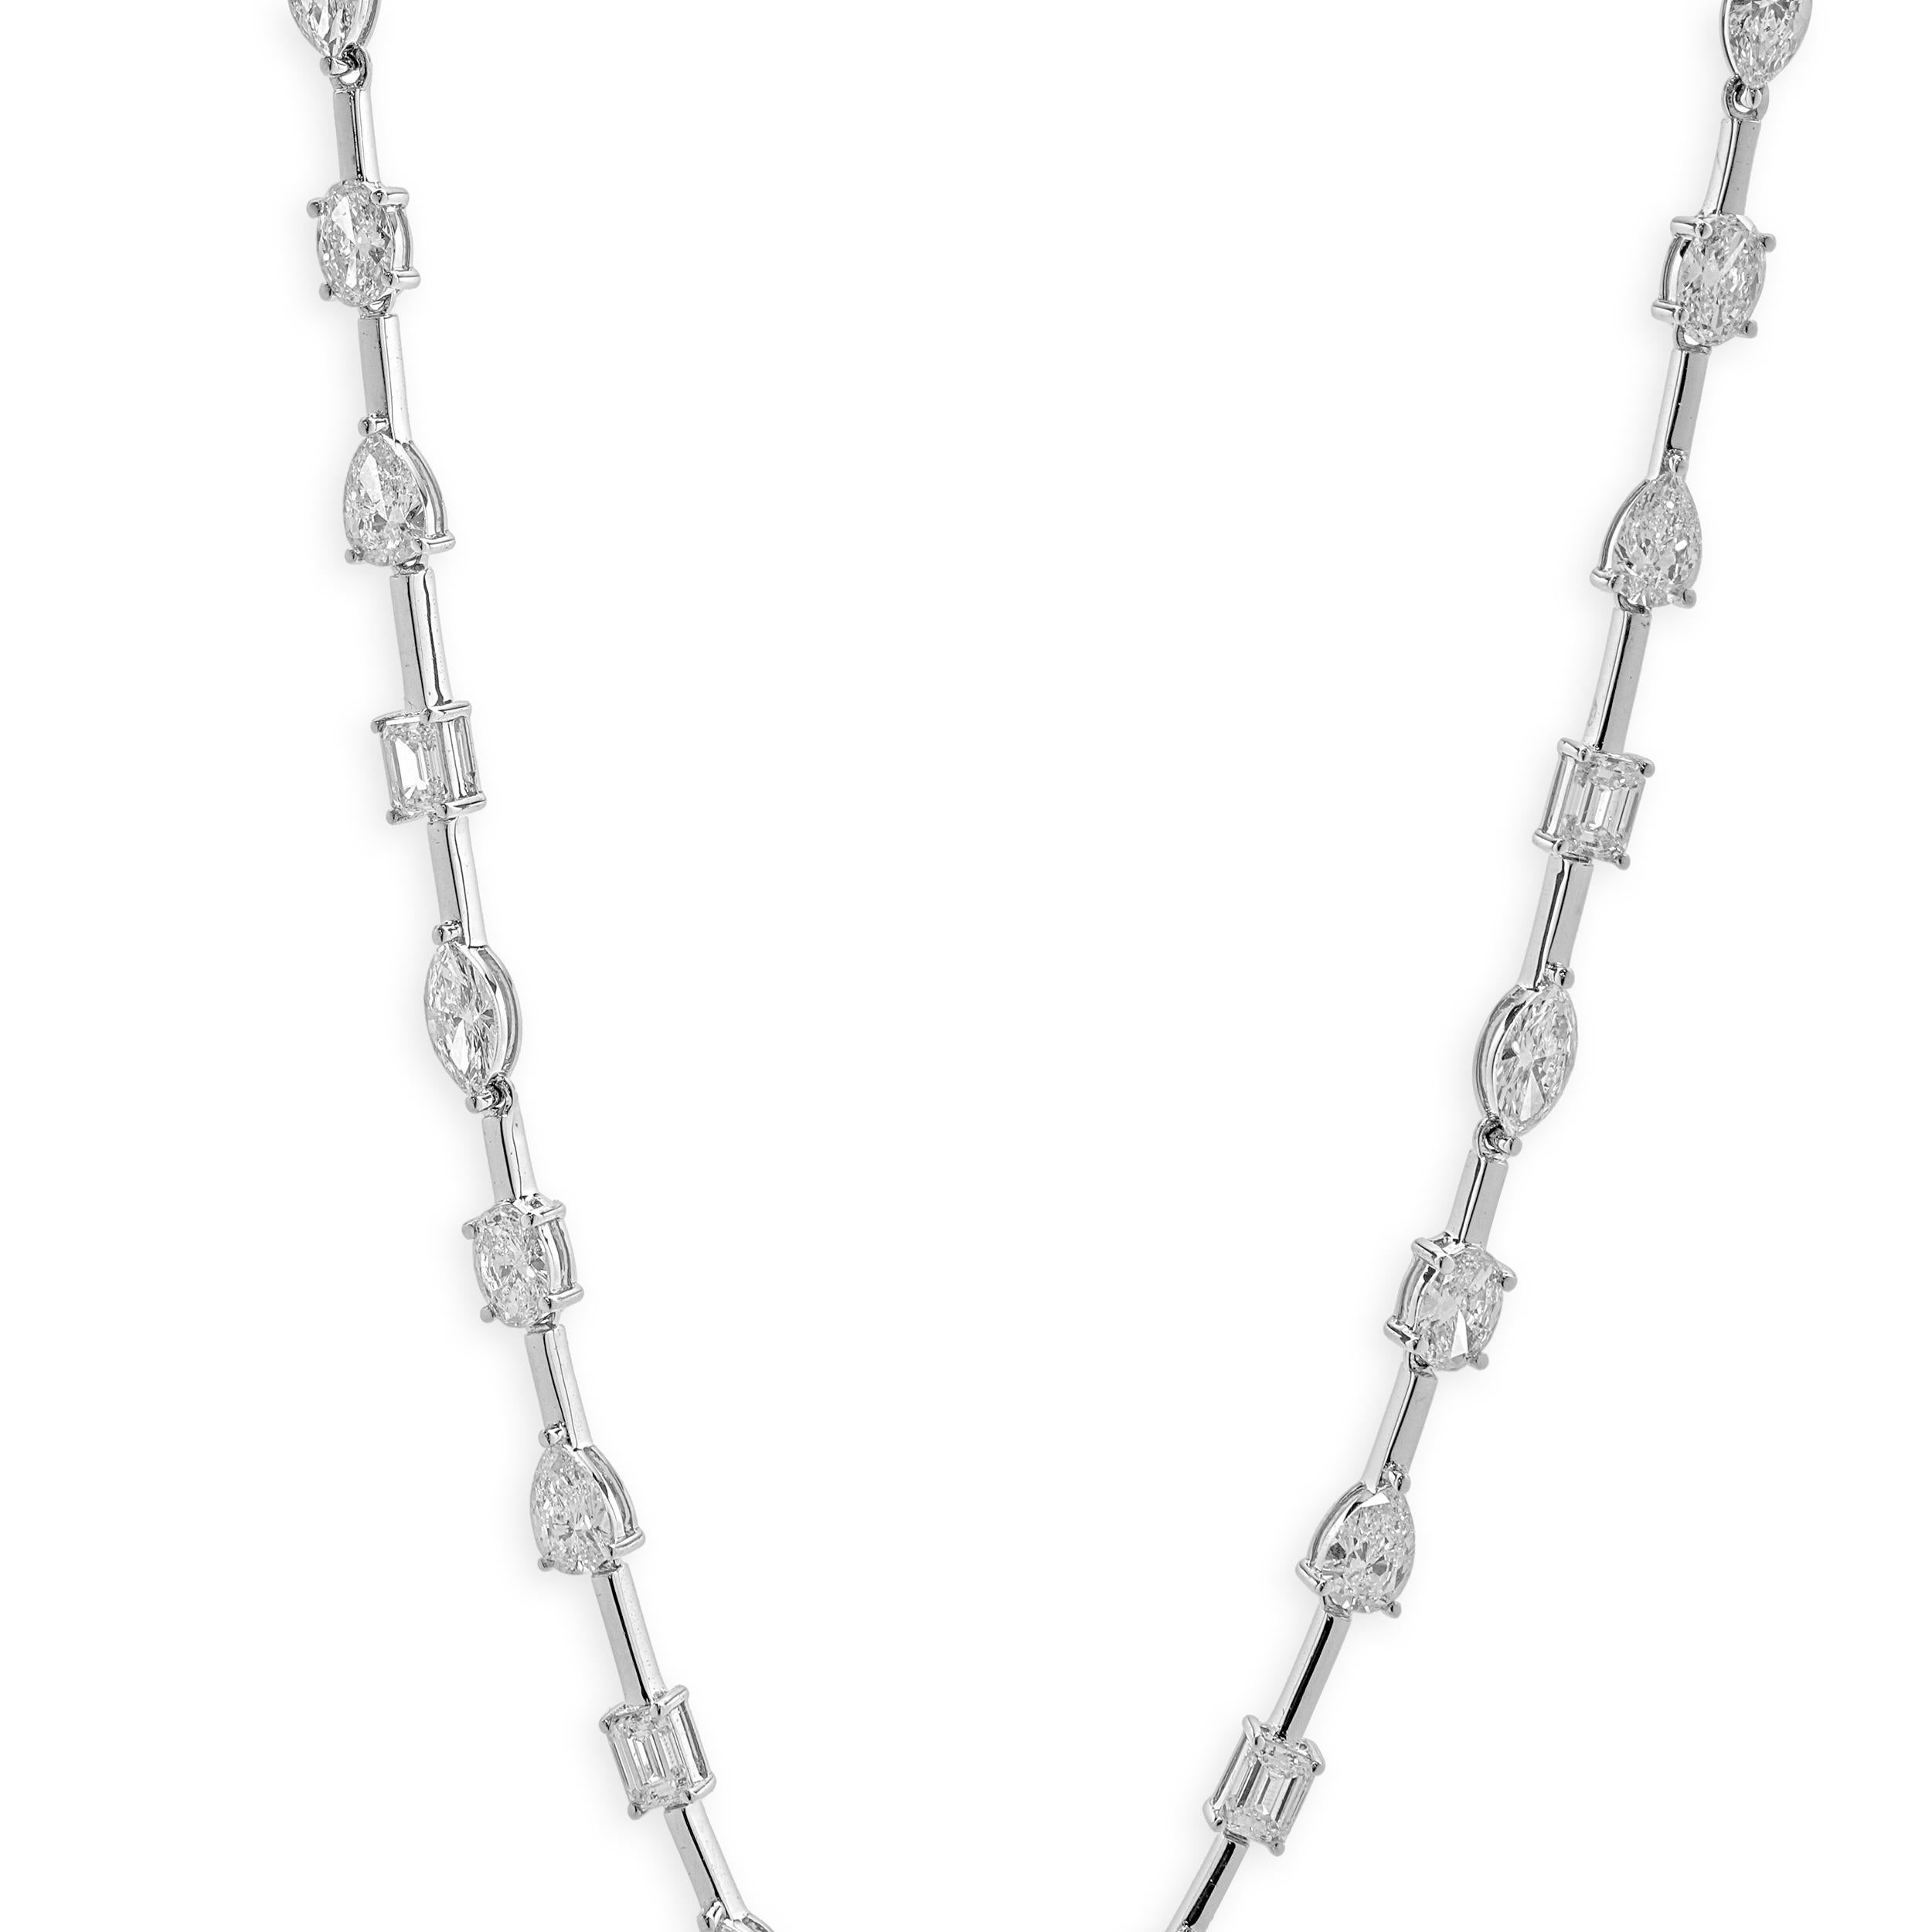 Designer: custom
Material: 14K white gold
Diamonds: 49 round brilliant Diamonds= 9.37cttw
Color: G
Clarity:VS-SI1
Dimensions: necklace measures 17-inches in length 
Weight: 15.13 grams
